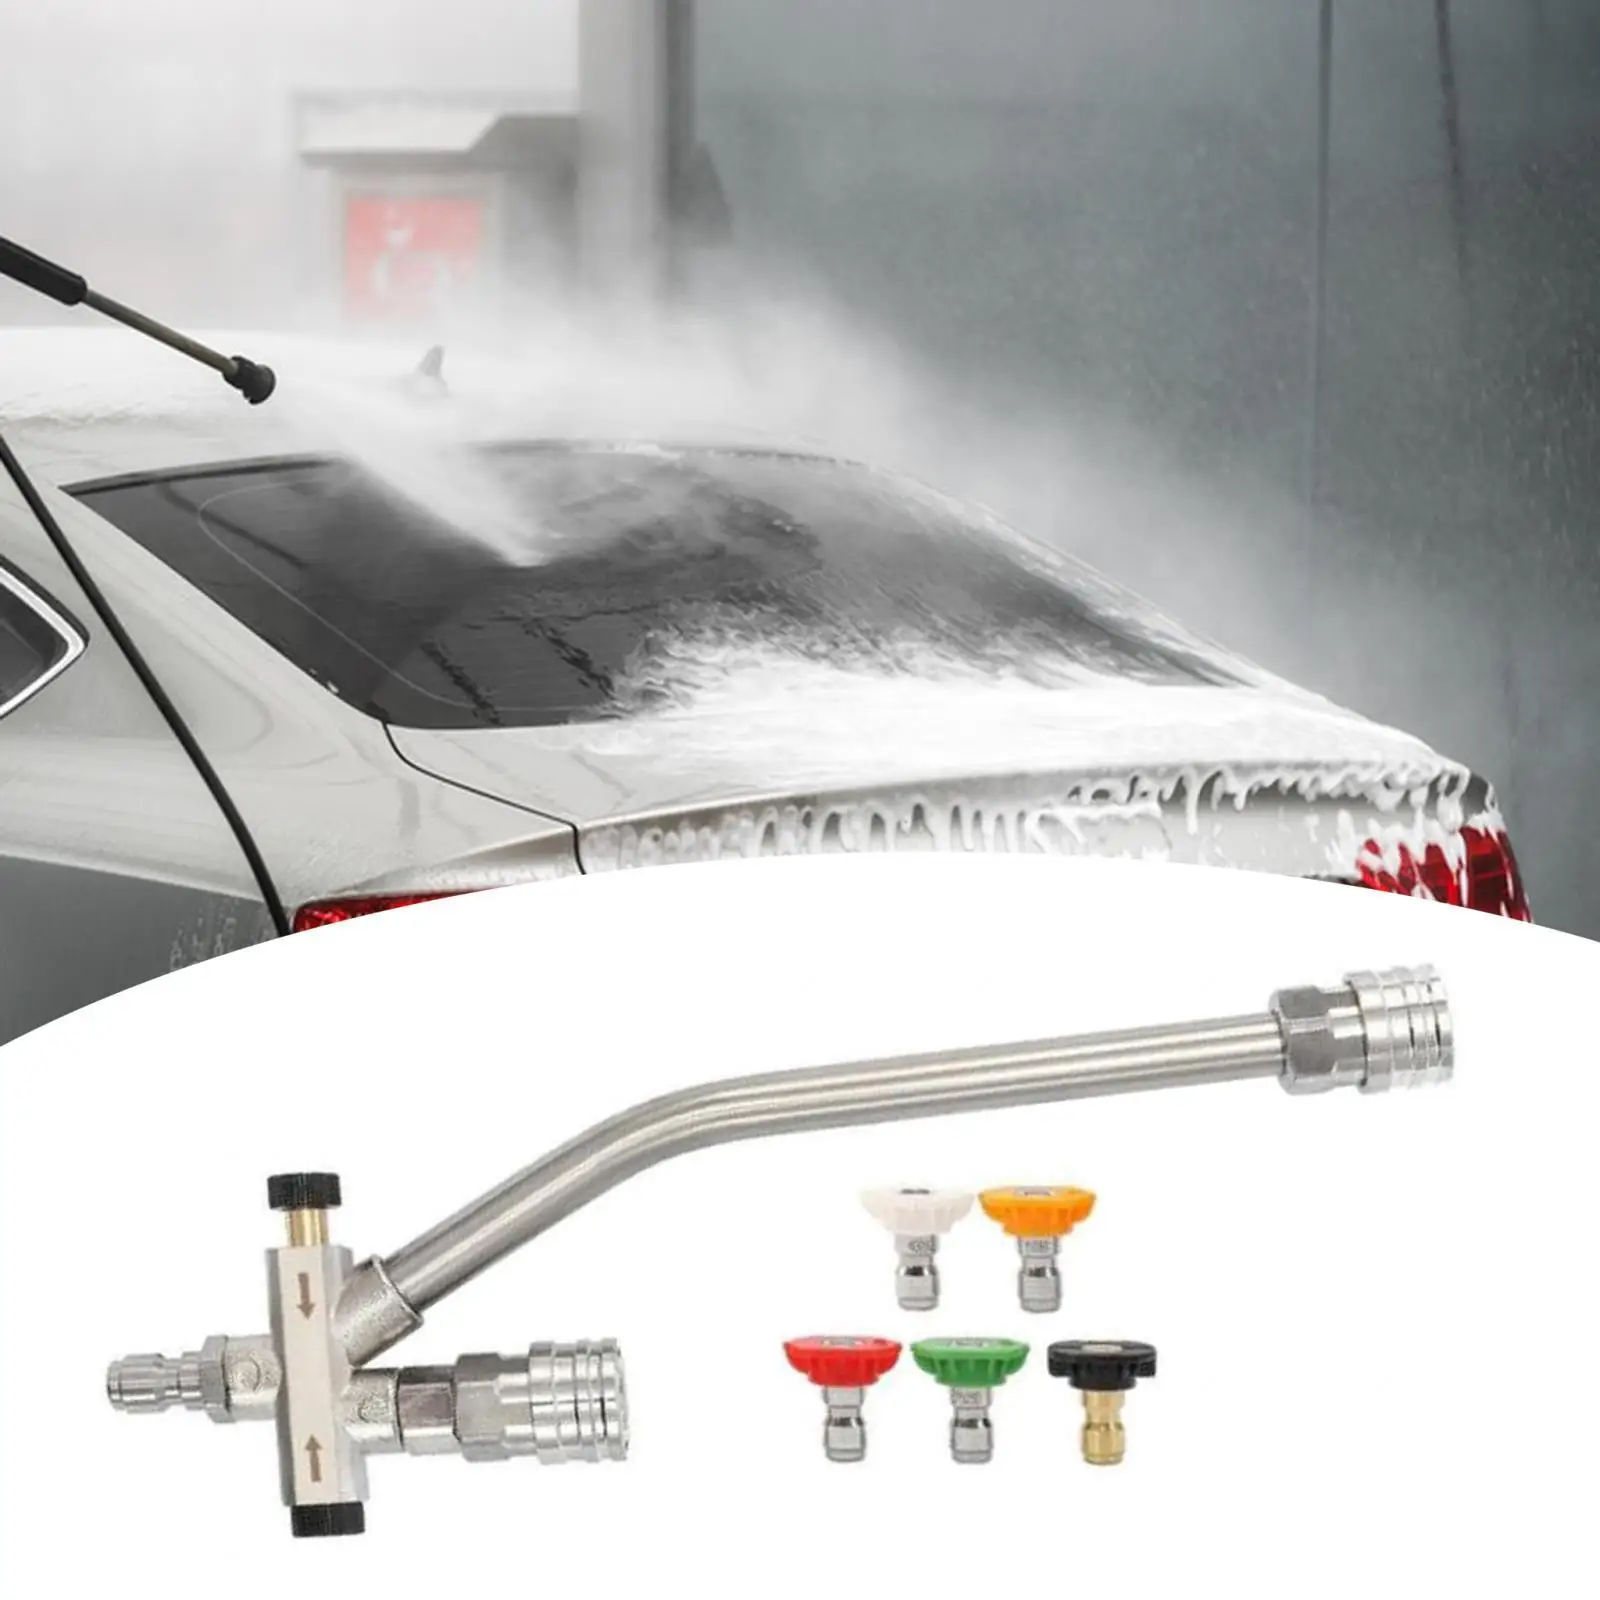 Pressure Washer Double Tip Attachment Pressure Washer Accessories for Irrigate Washing Cars Watering Flowers Cleaning Driveways